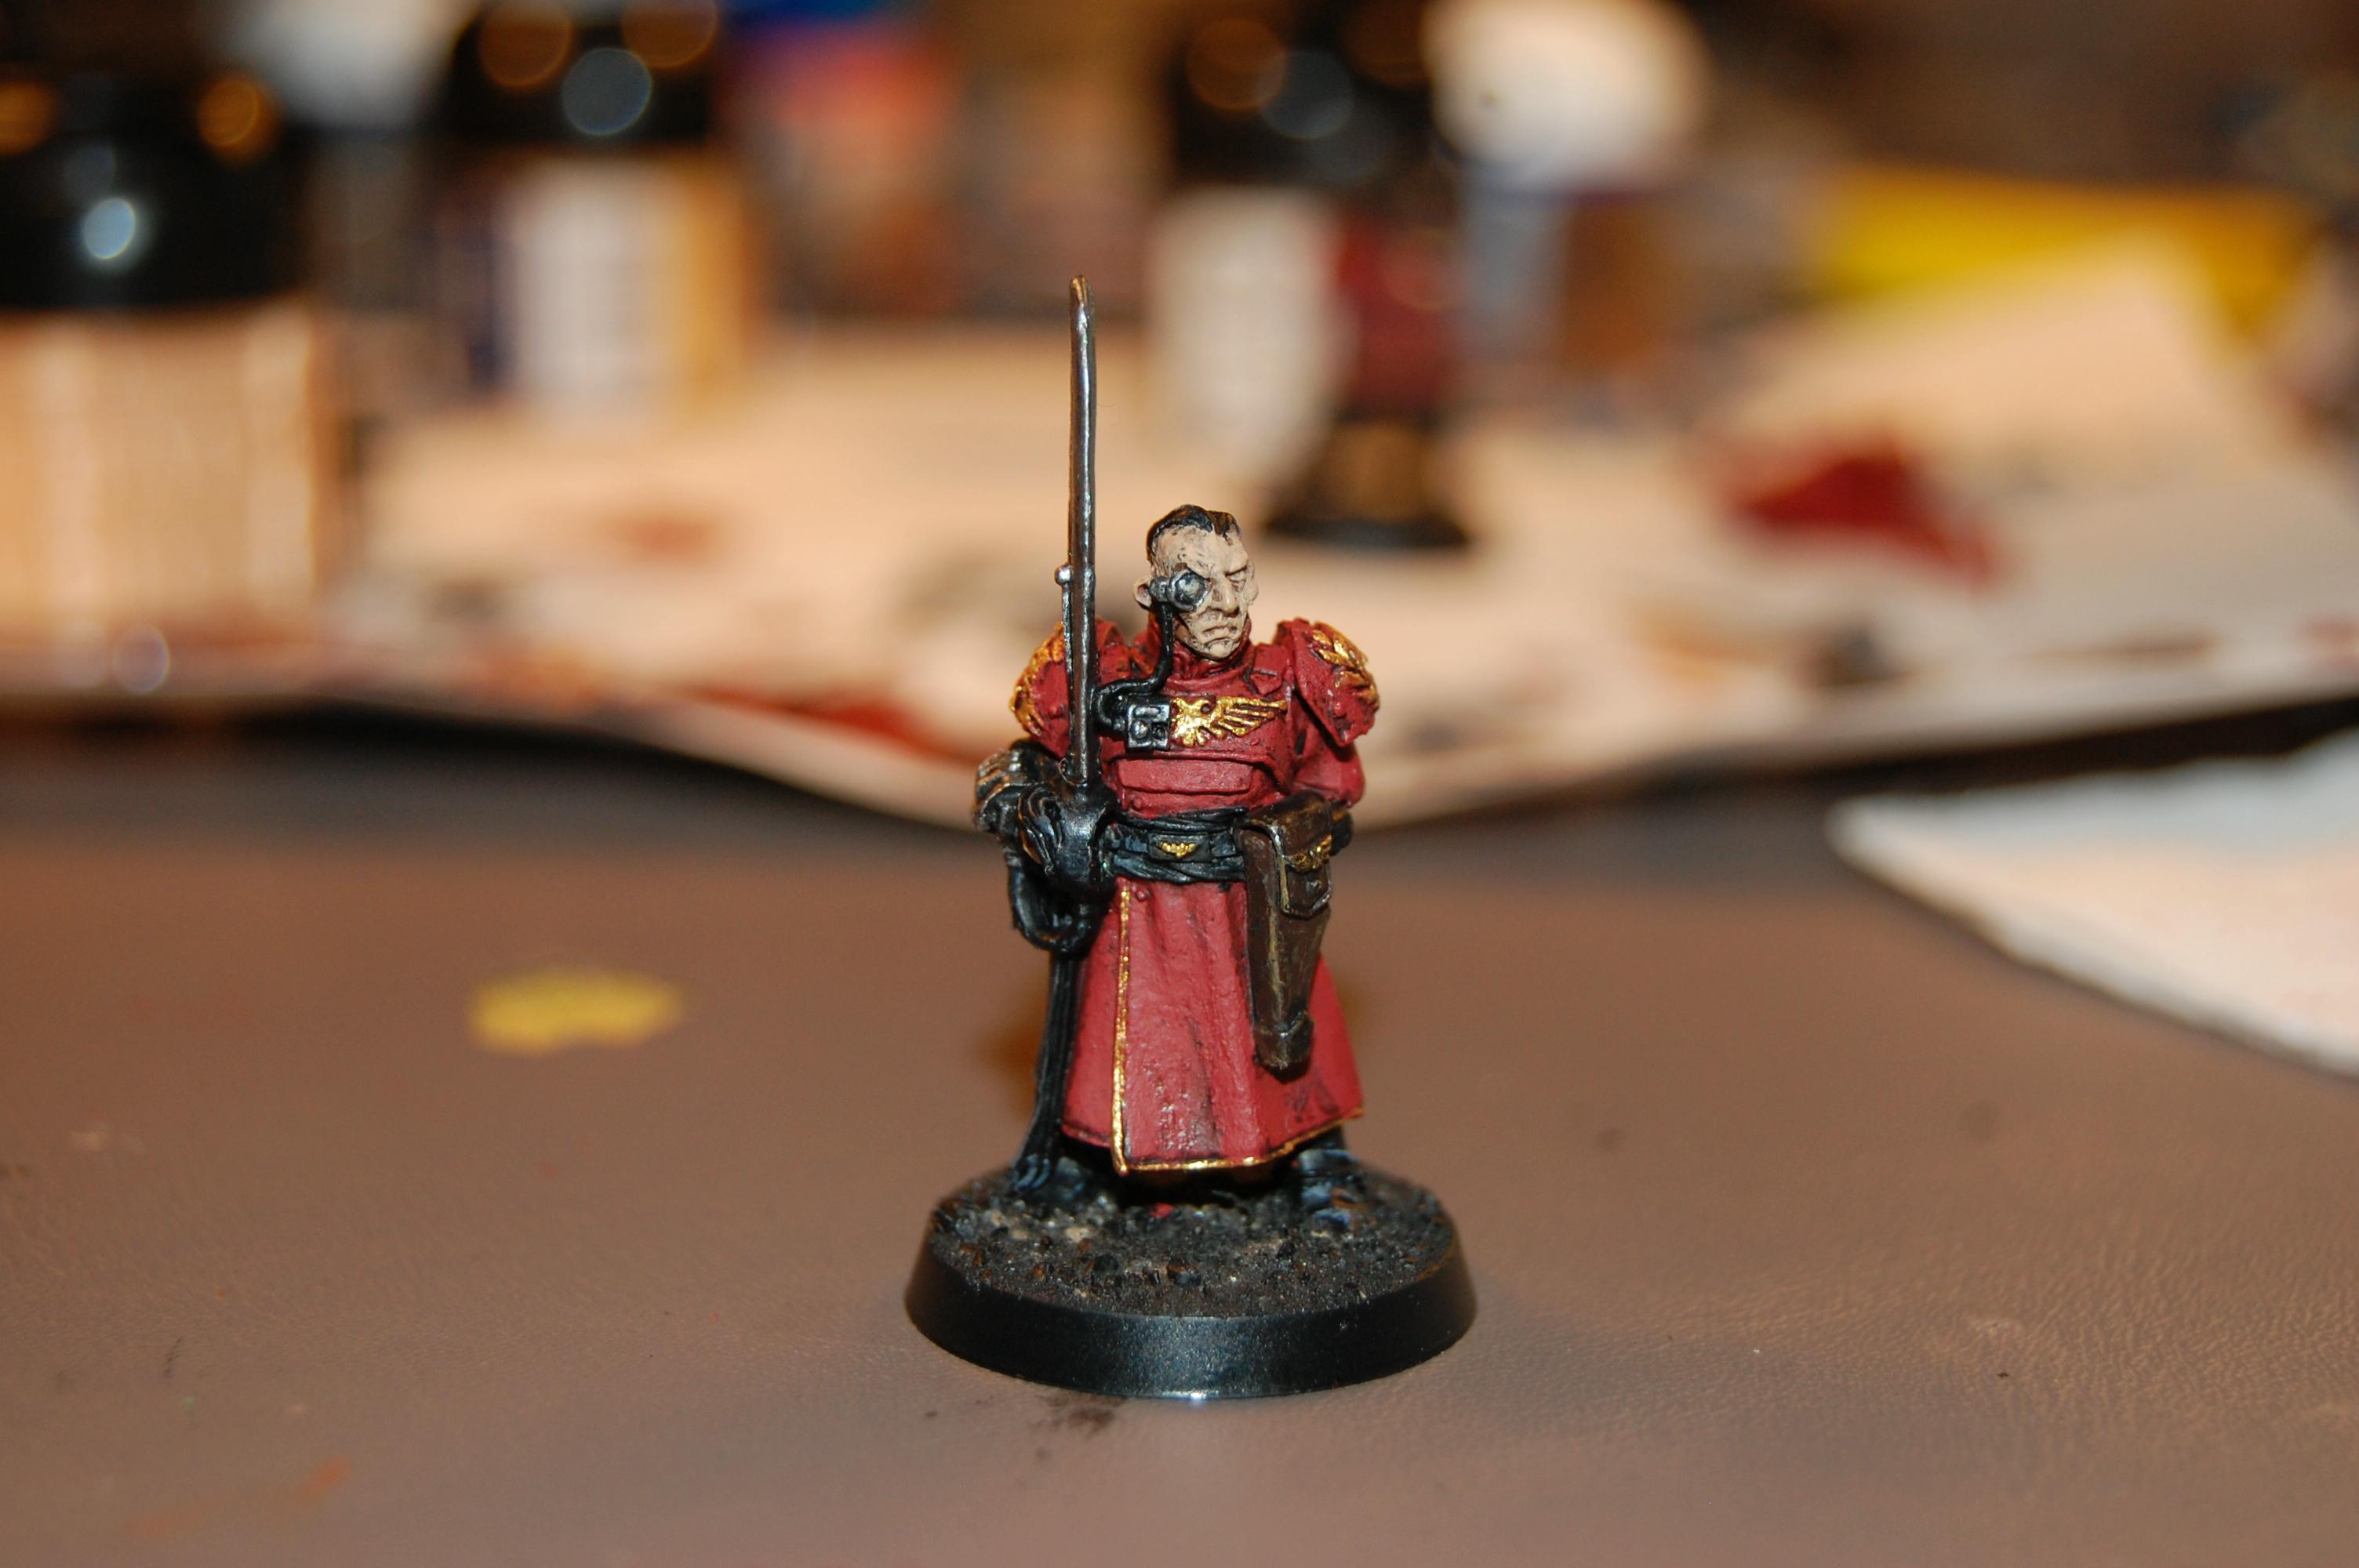 Imperial Guard, Warhammer 40,000